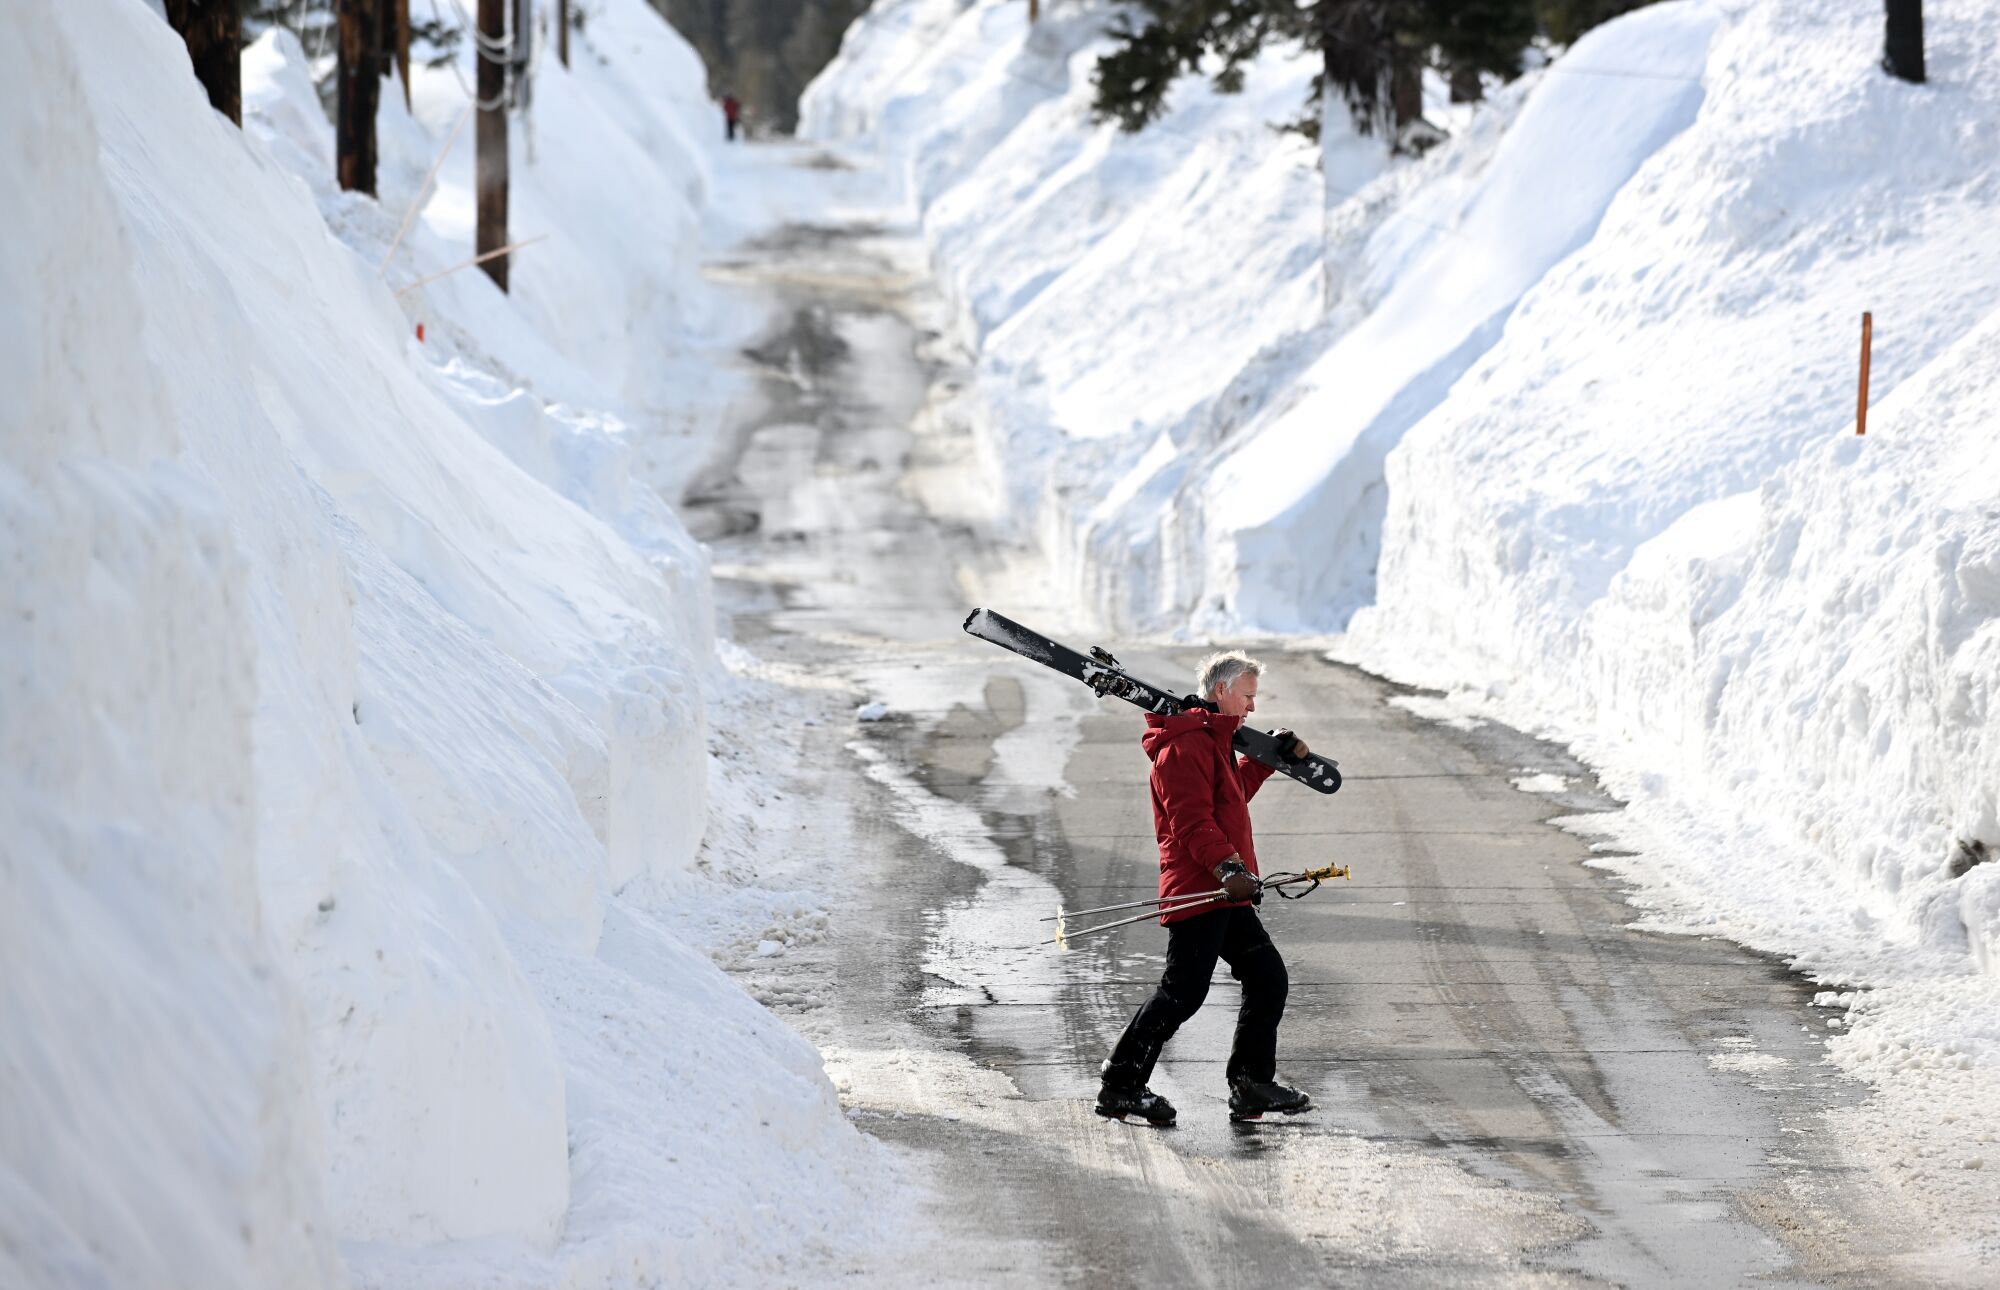 David Frazier walks across Davison Road after a day of skiing at Mammoth Mountain